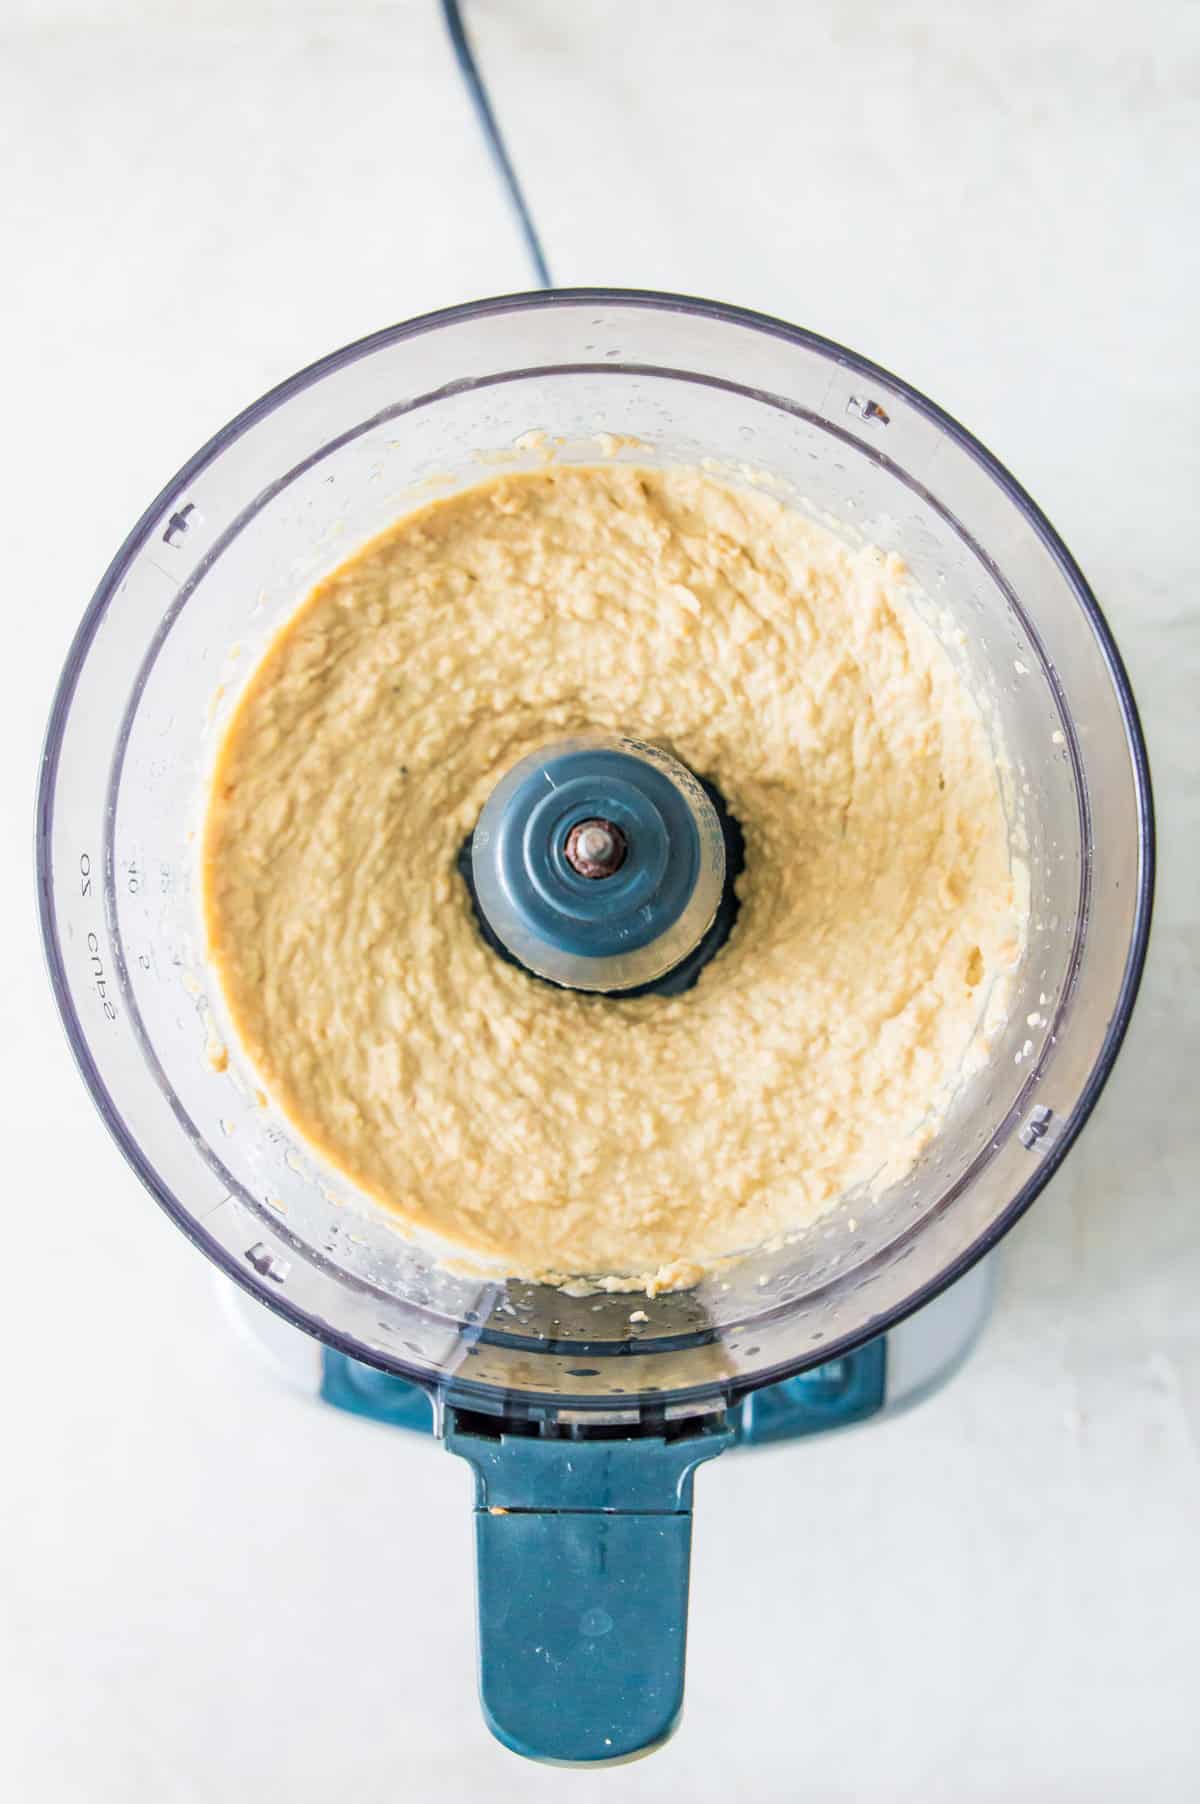 A food processor filled with a blended hummus dip.